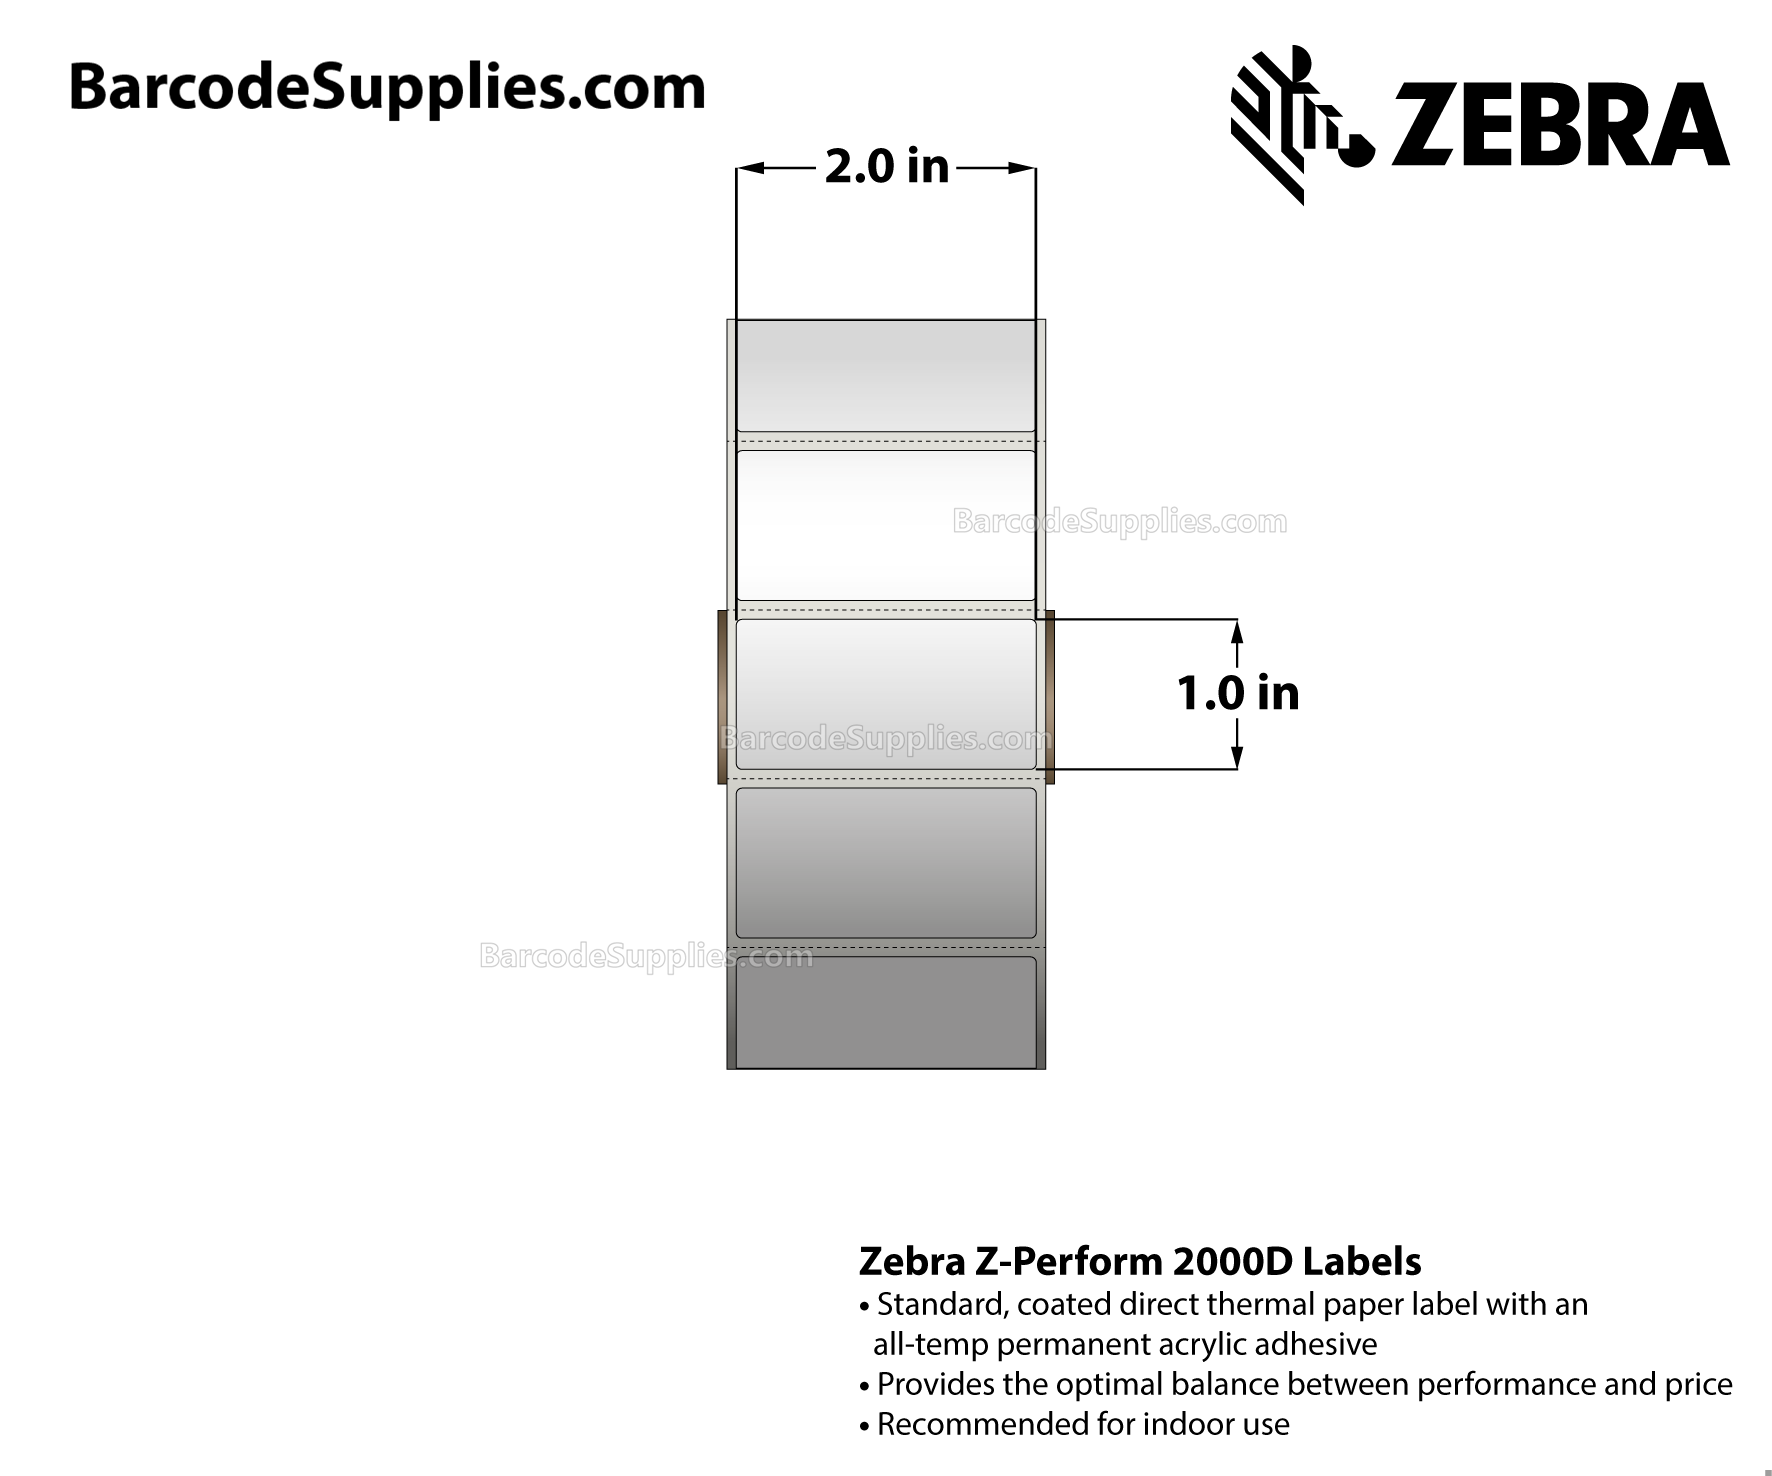 2 x 1 Direct Thermal White Z-Perform 2000D Labels With All-Temp Adhesive - Perforated - 2340 Labels Per Roll - Carton Of 6 Rolls - 14040 Labels Total - MPN: 10010028